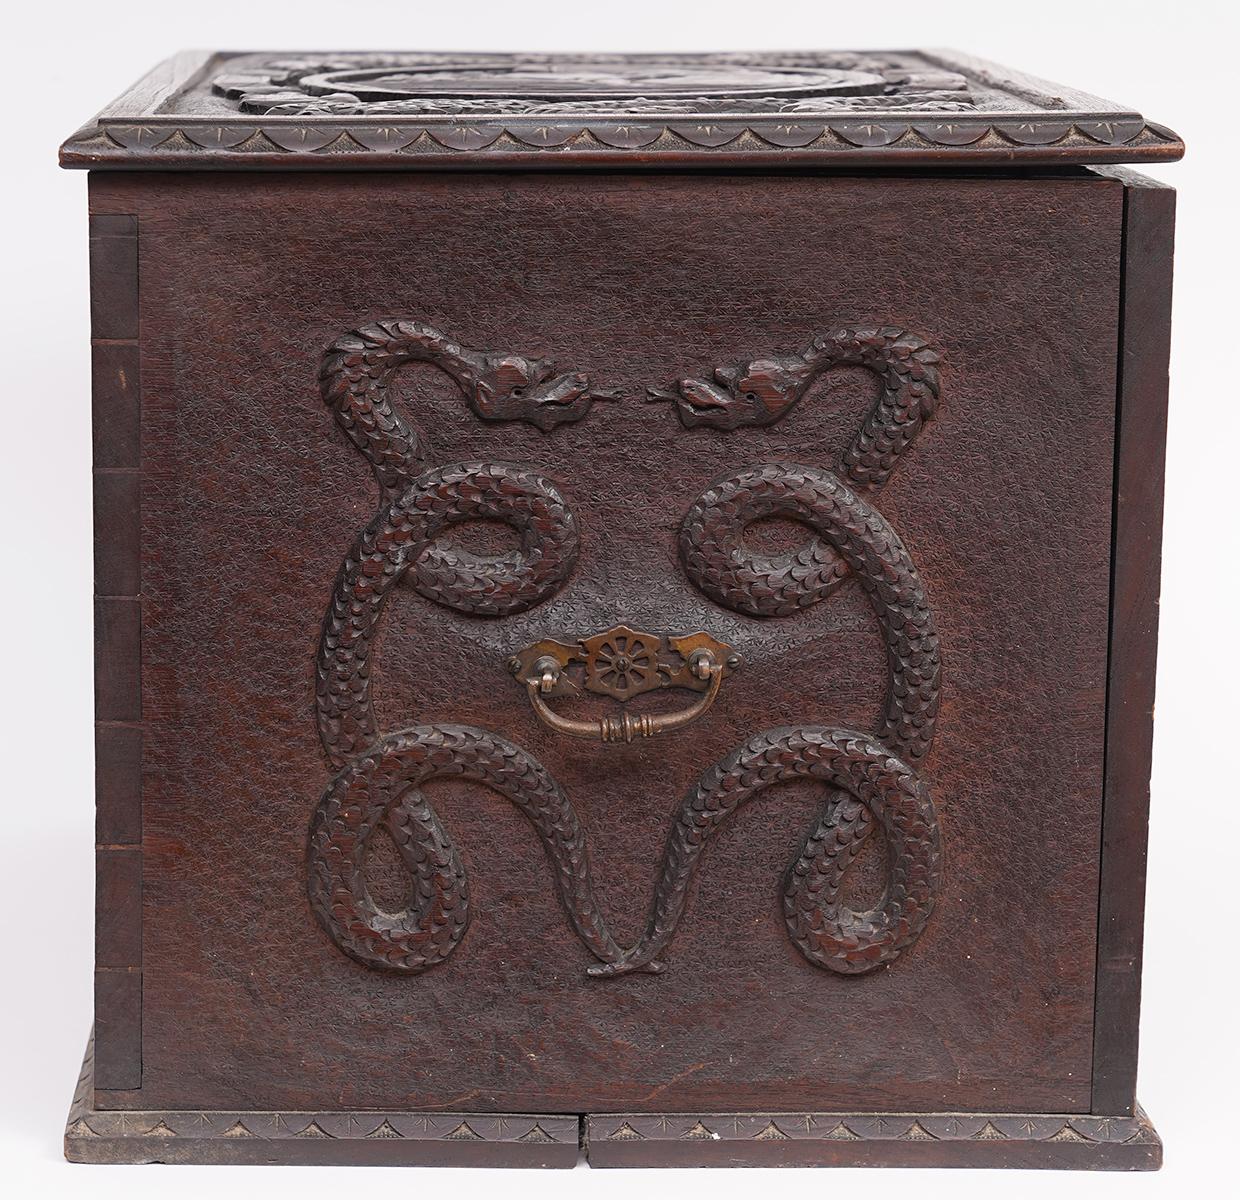 19th Century Italian Carved Walnut Captain's Box with Sea Monsters, Coat of Arms and Dolphins